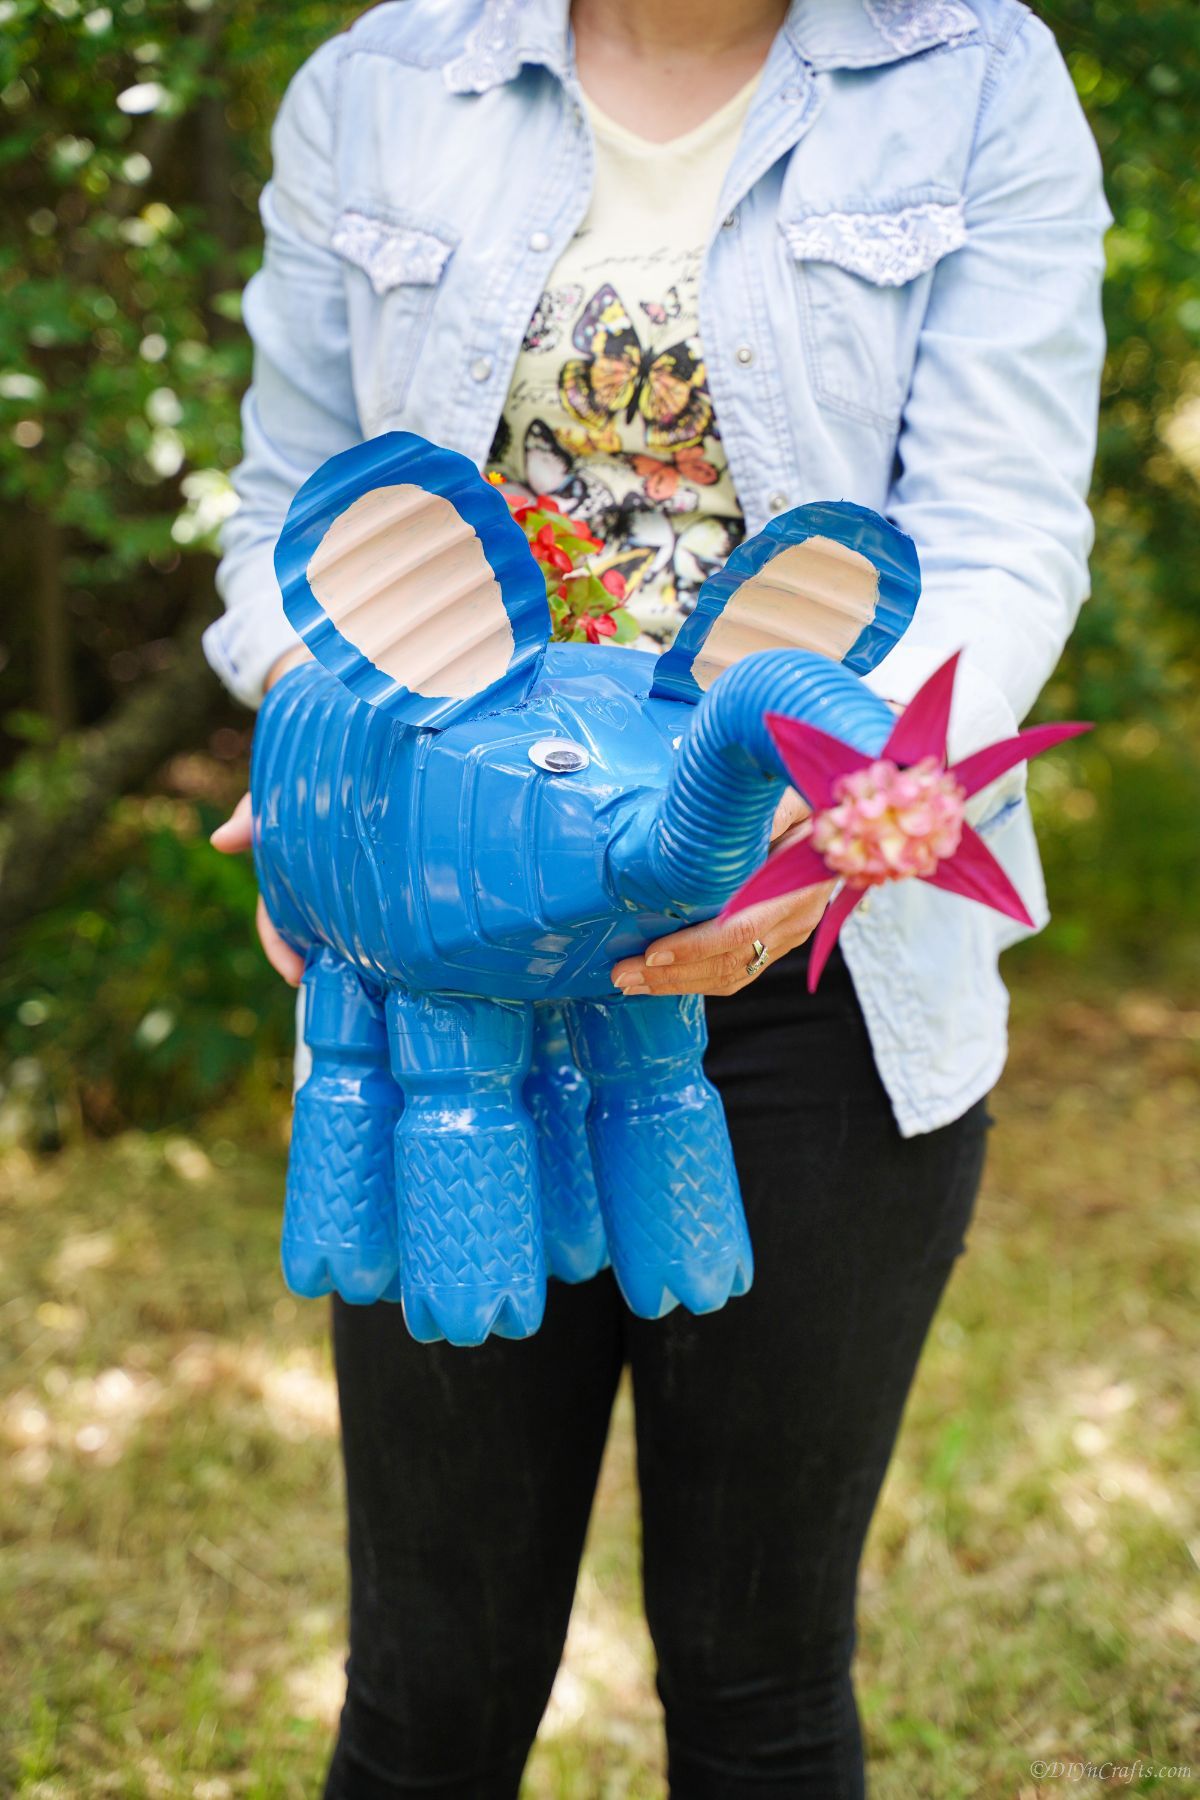 woman in black pants holding bright blue elephant planter